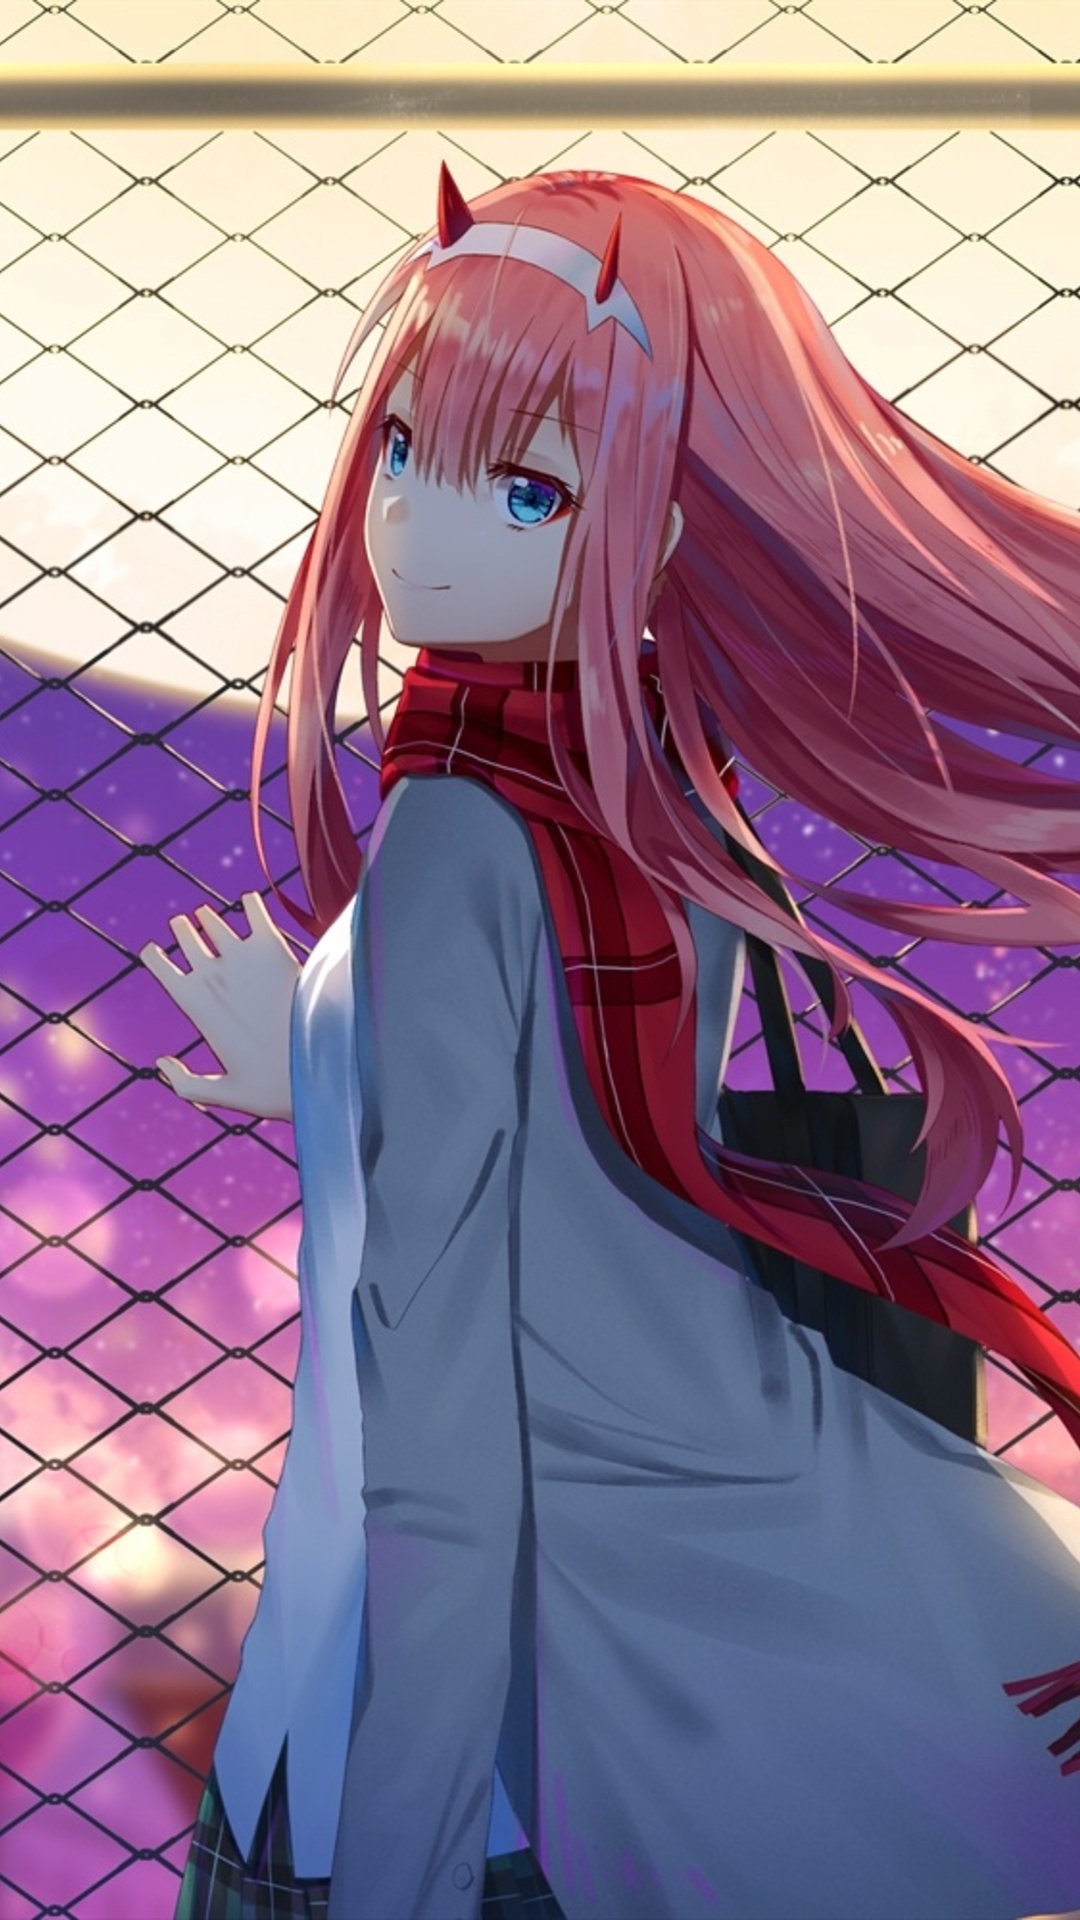 1080x1920 Zero Two Darling In The Franxx Iphone 7,6s,6 ...